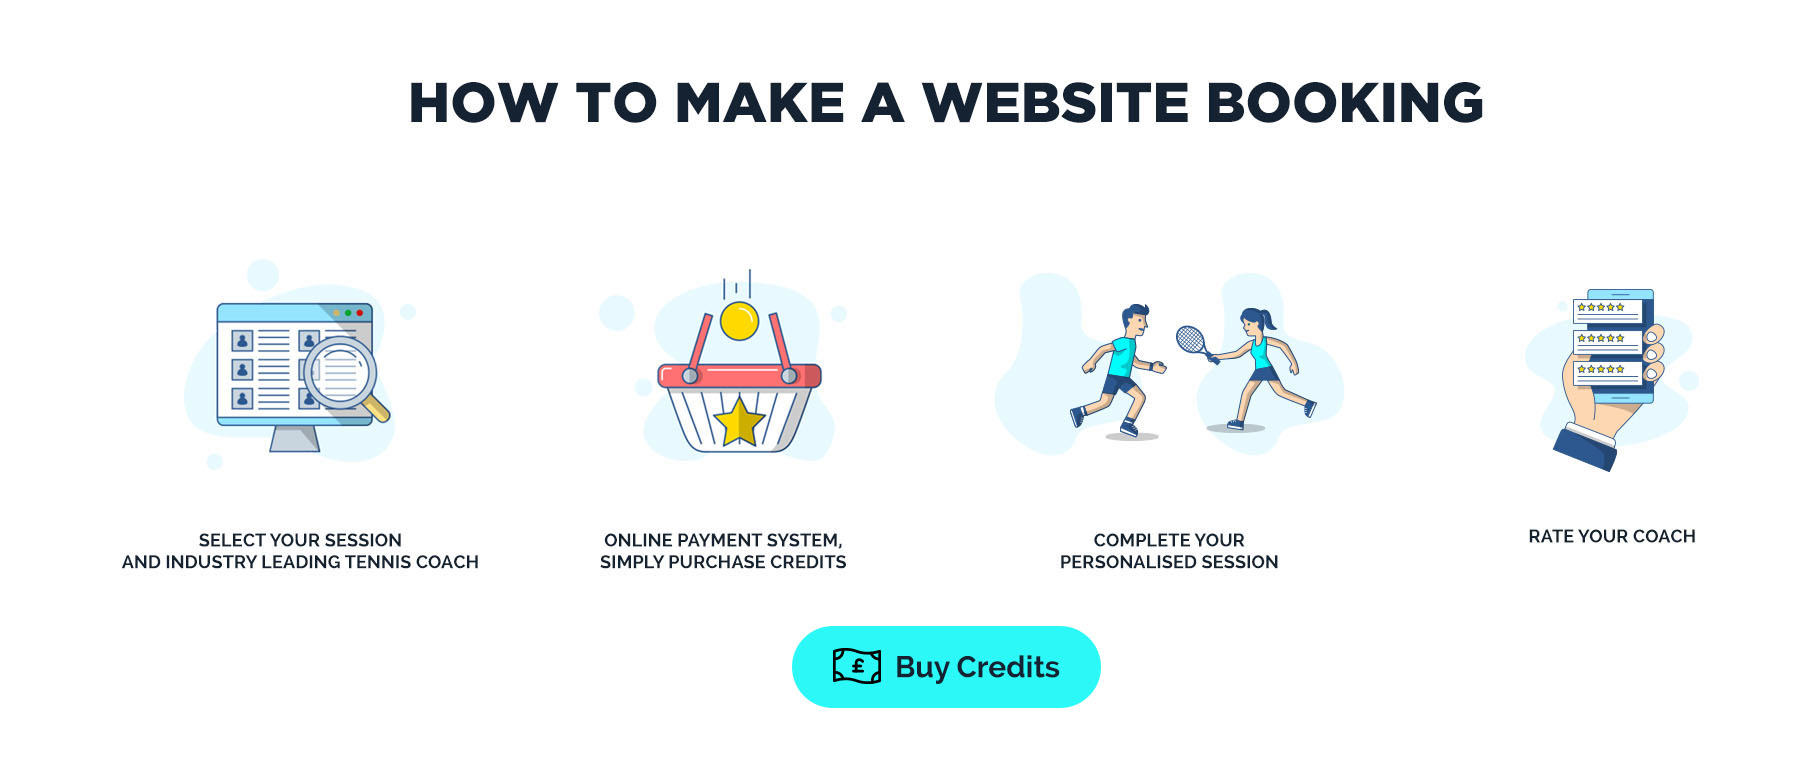 How to make a website booking